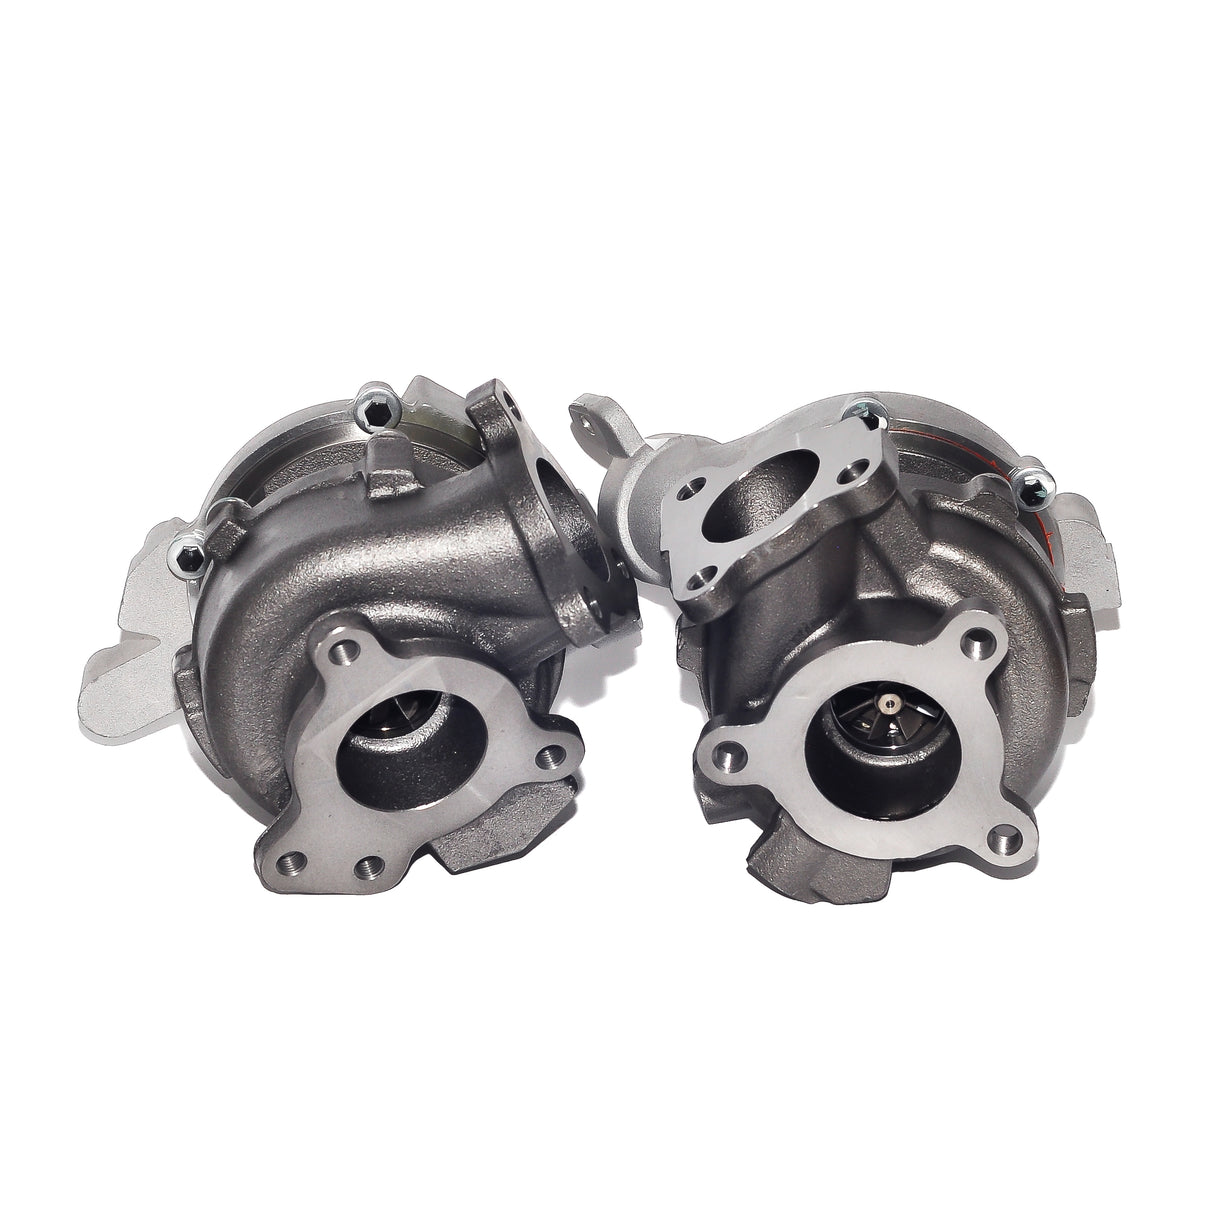 CCT Stage One Billet Twin Turbo charger To Suit Toyota Landcruiser 200 Series 1VD-FTV TWIN TURBO